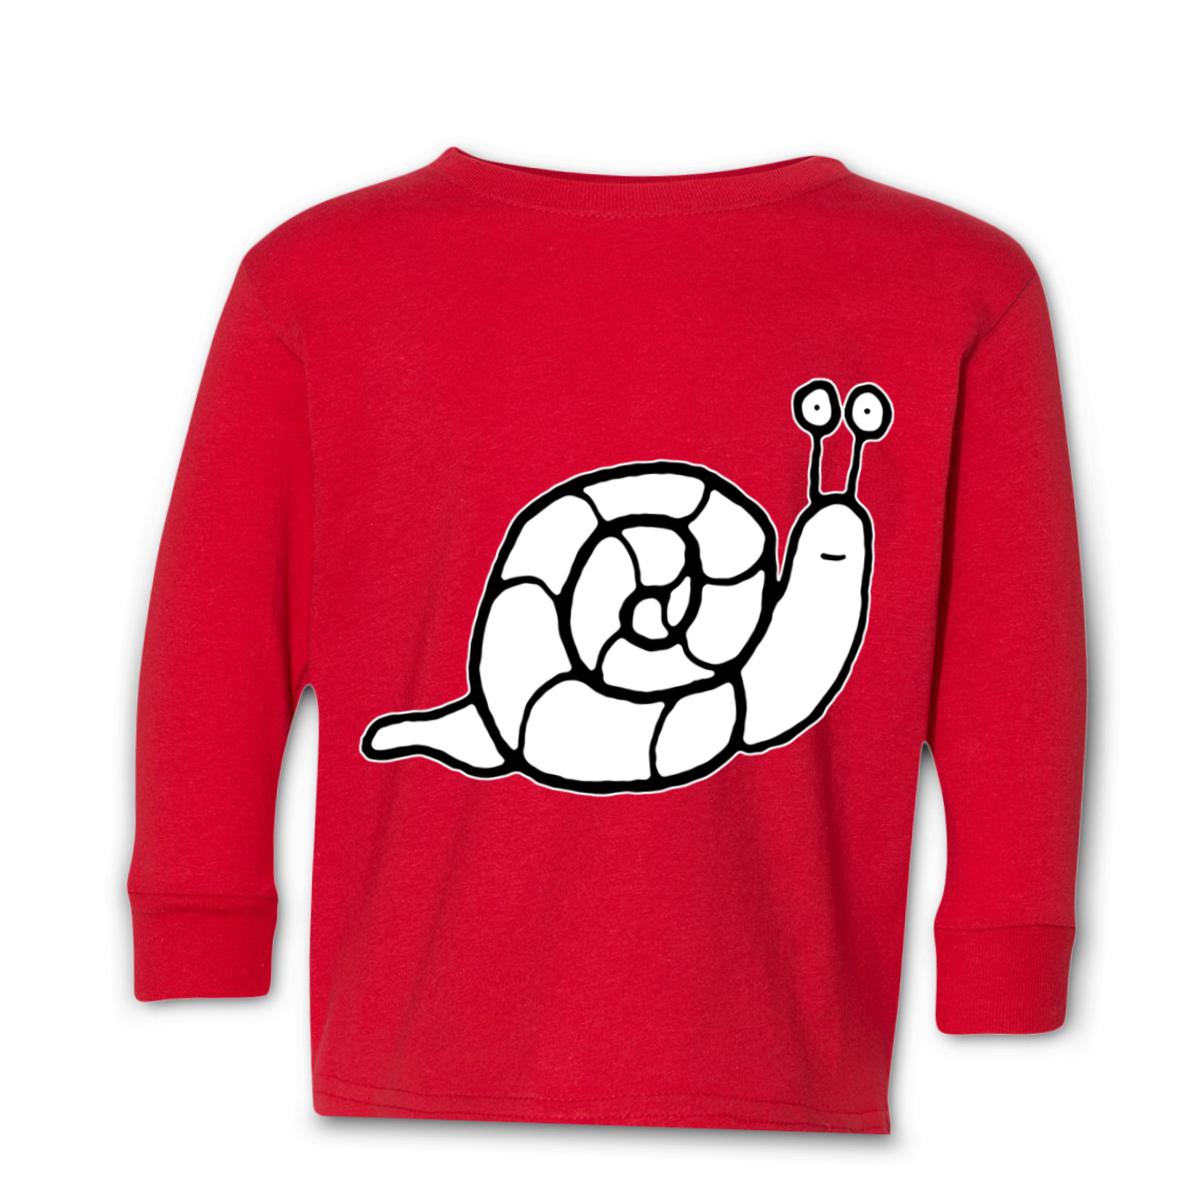 Snail Toddler Long Sleeve Tee 4T red